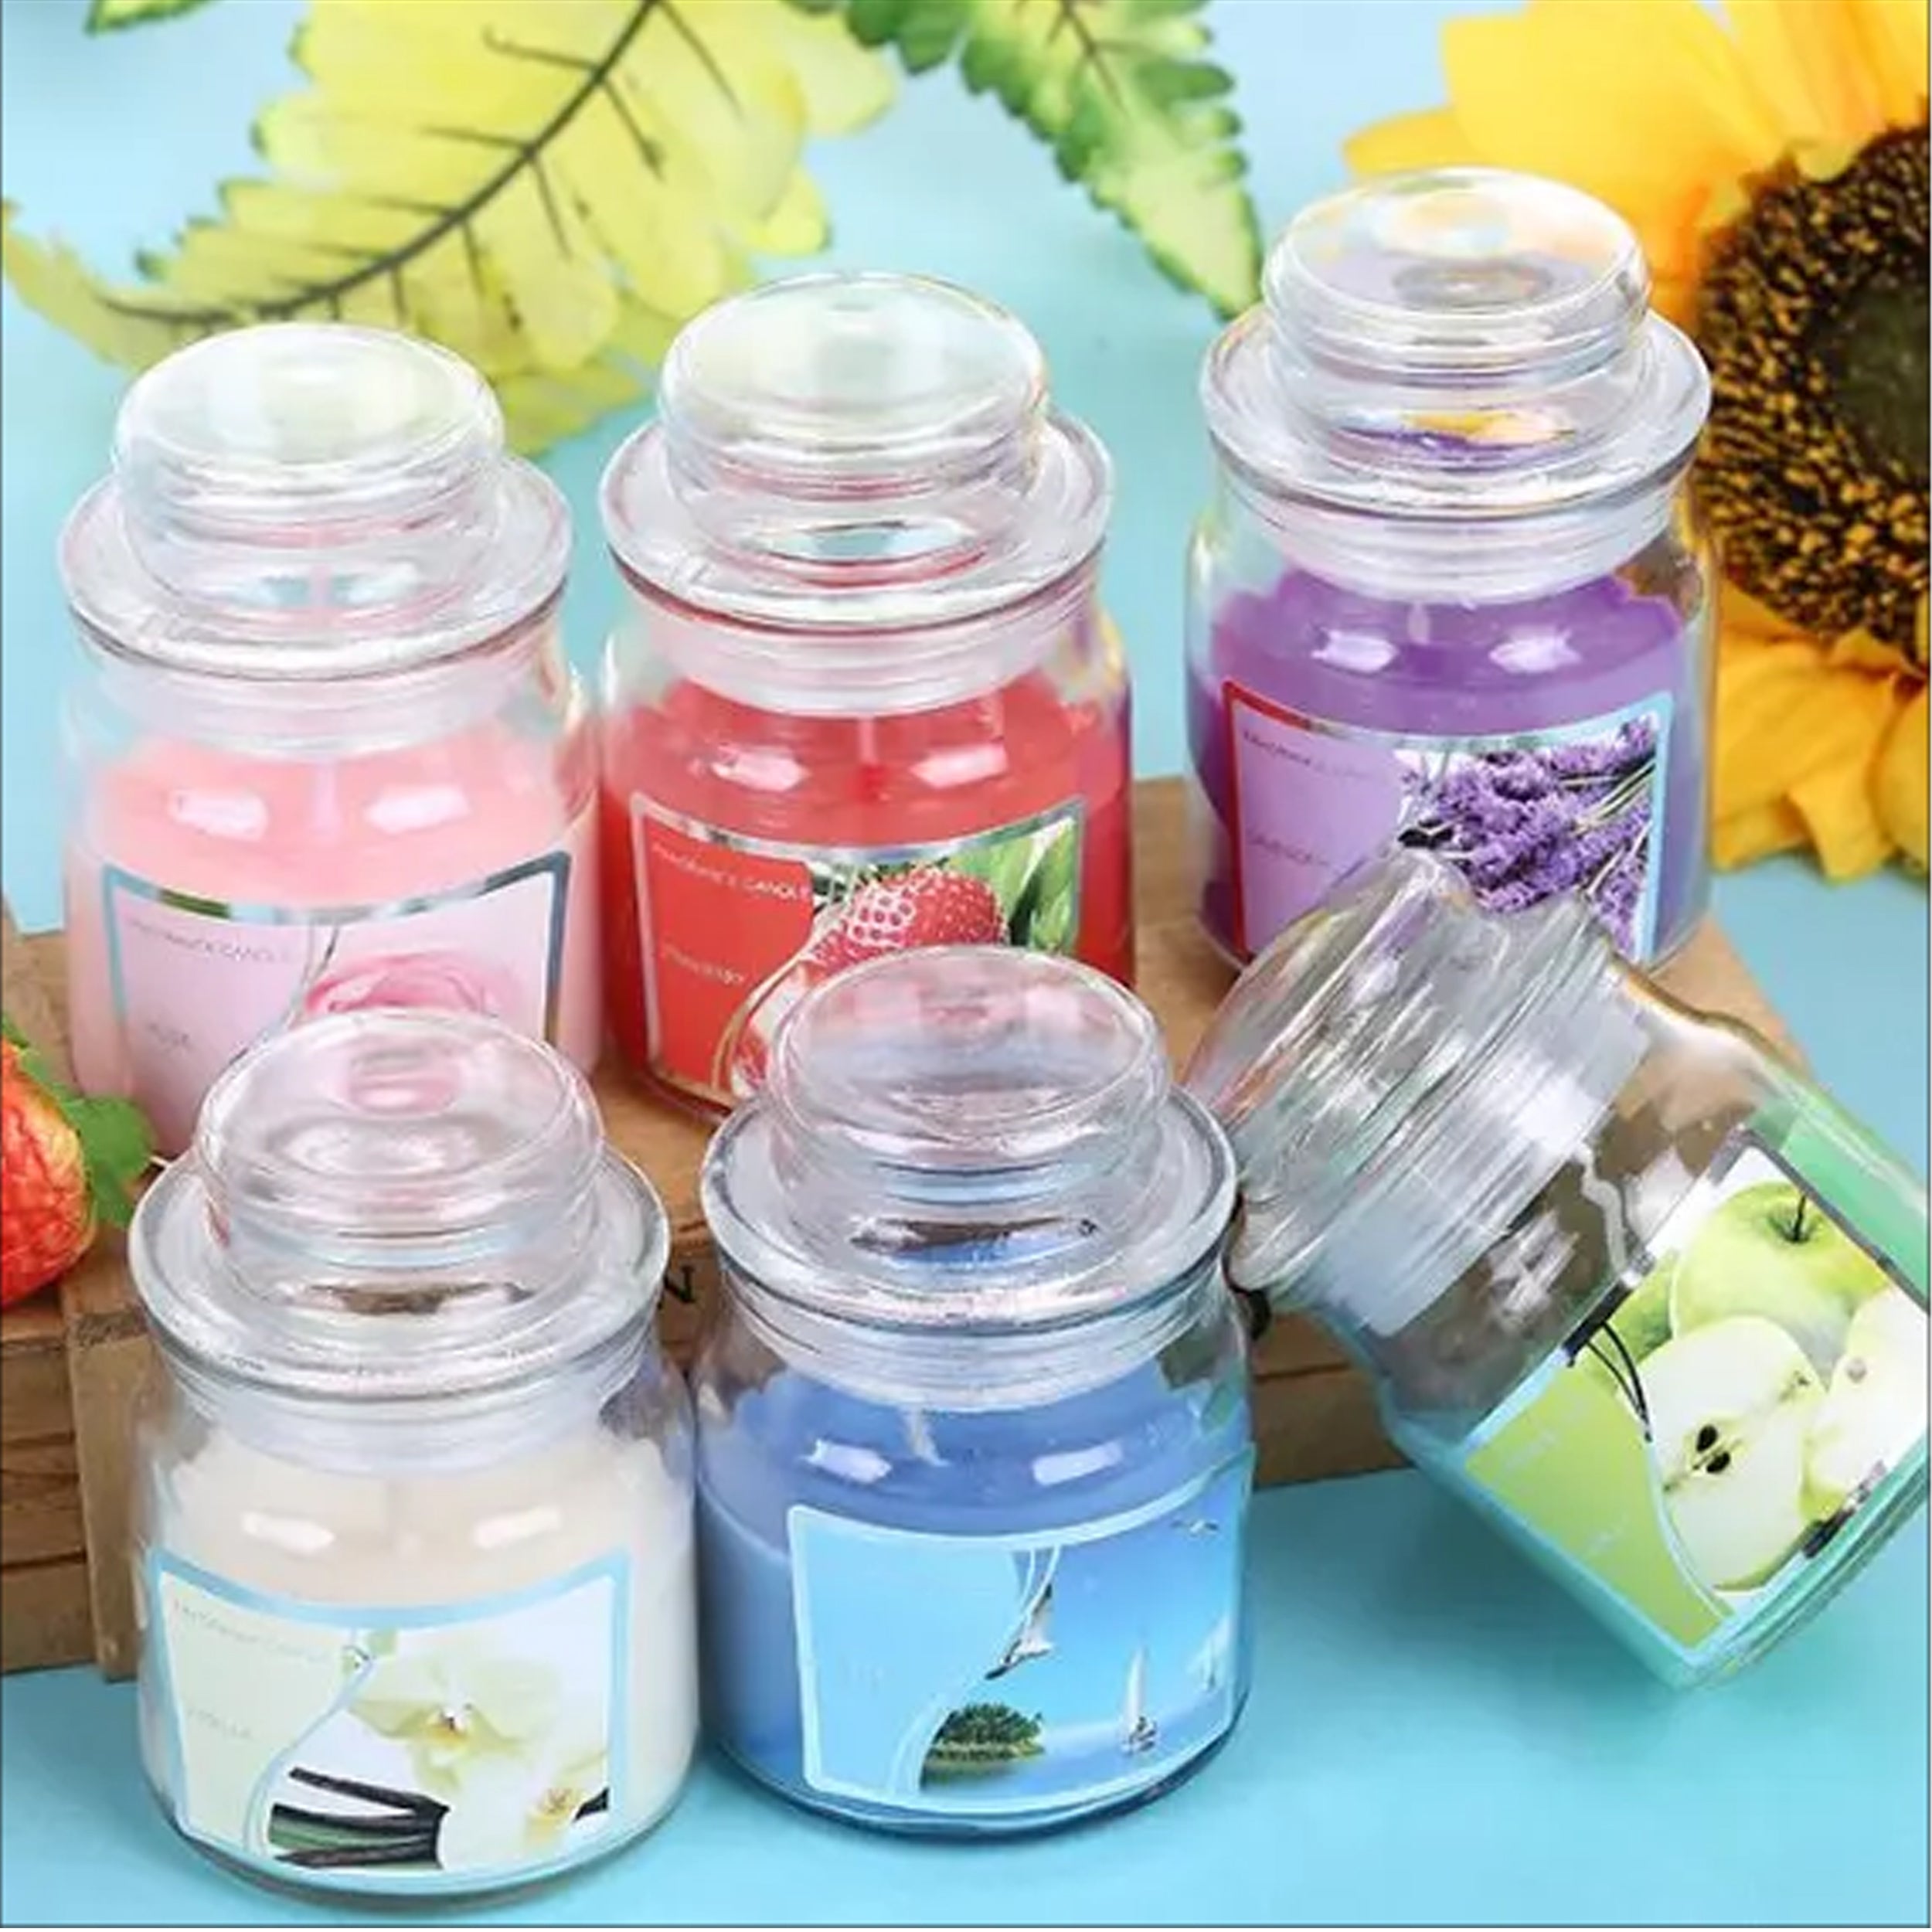 Aromatherapy Scent Candles Luxury Soy Wax Beach Scented Candles with Glass Candle Jars